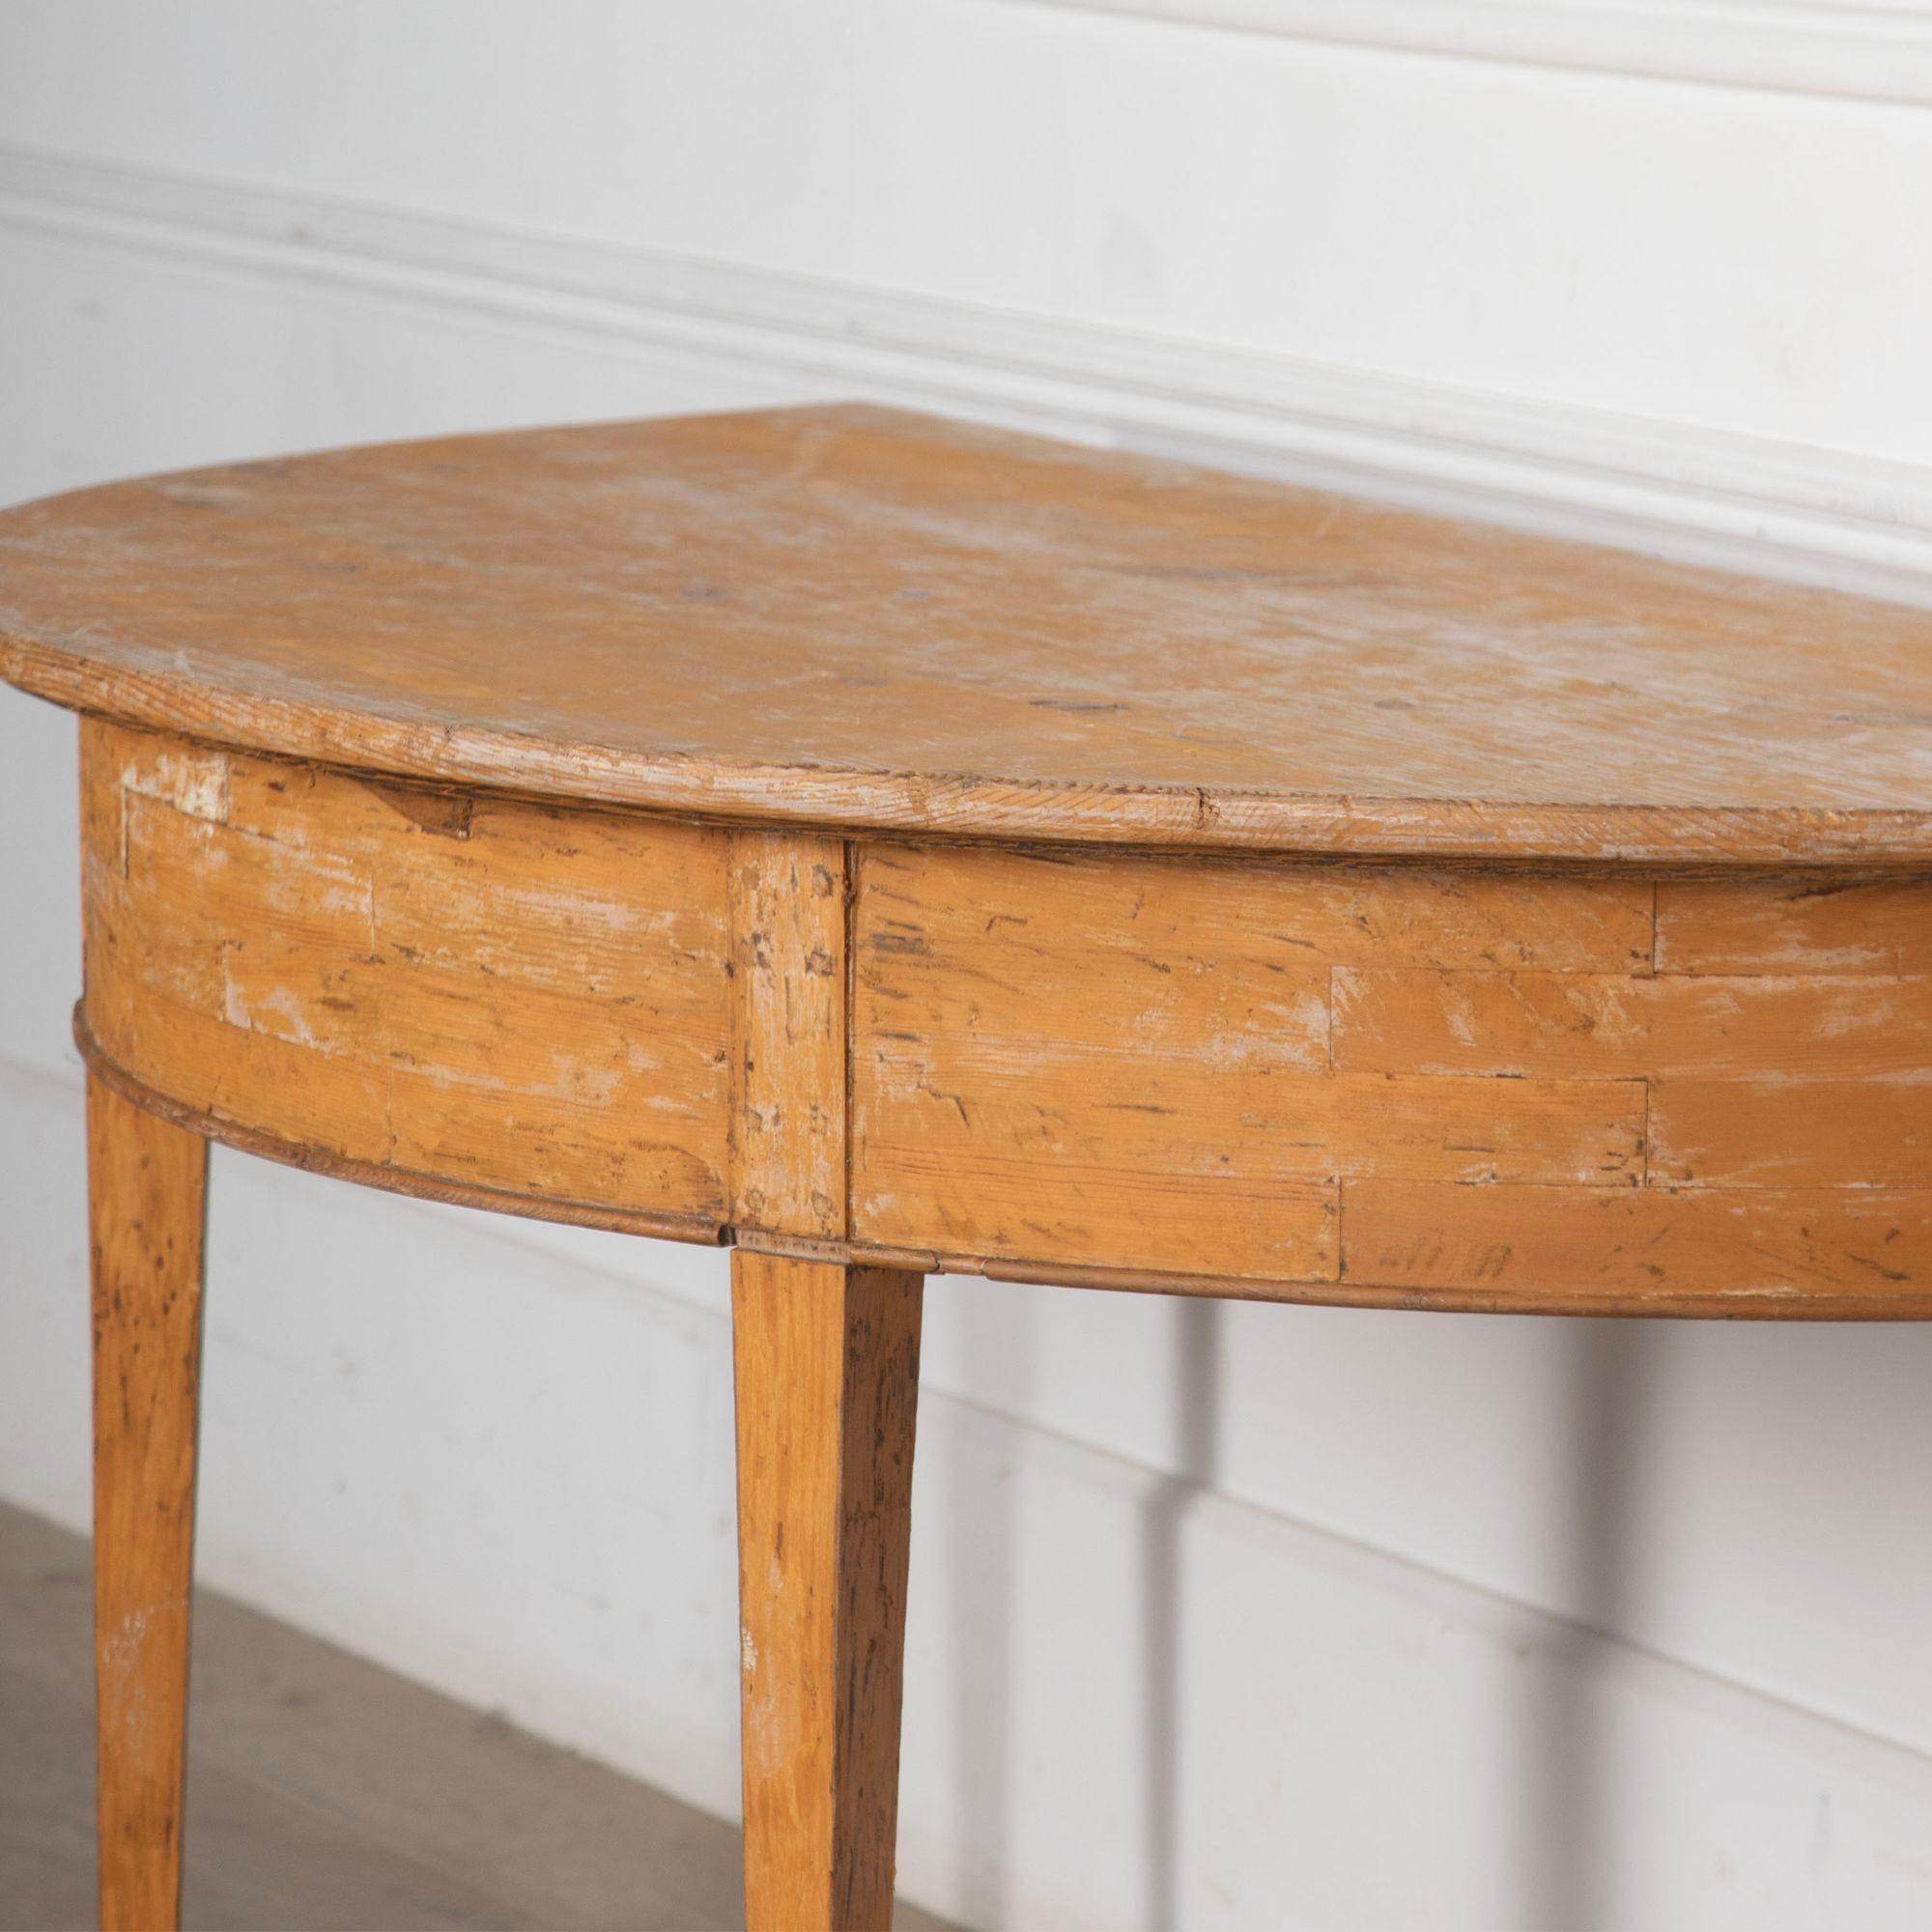 An unusually large scale pair of Gustavian period demilune tables in traces of original decoration.